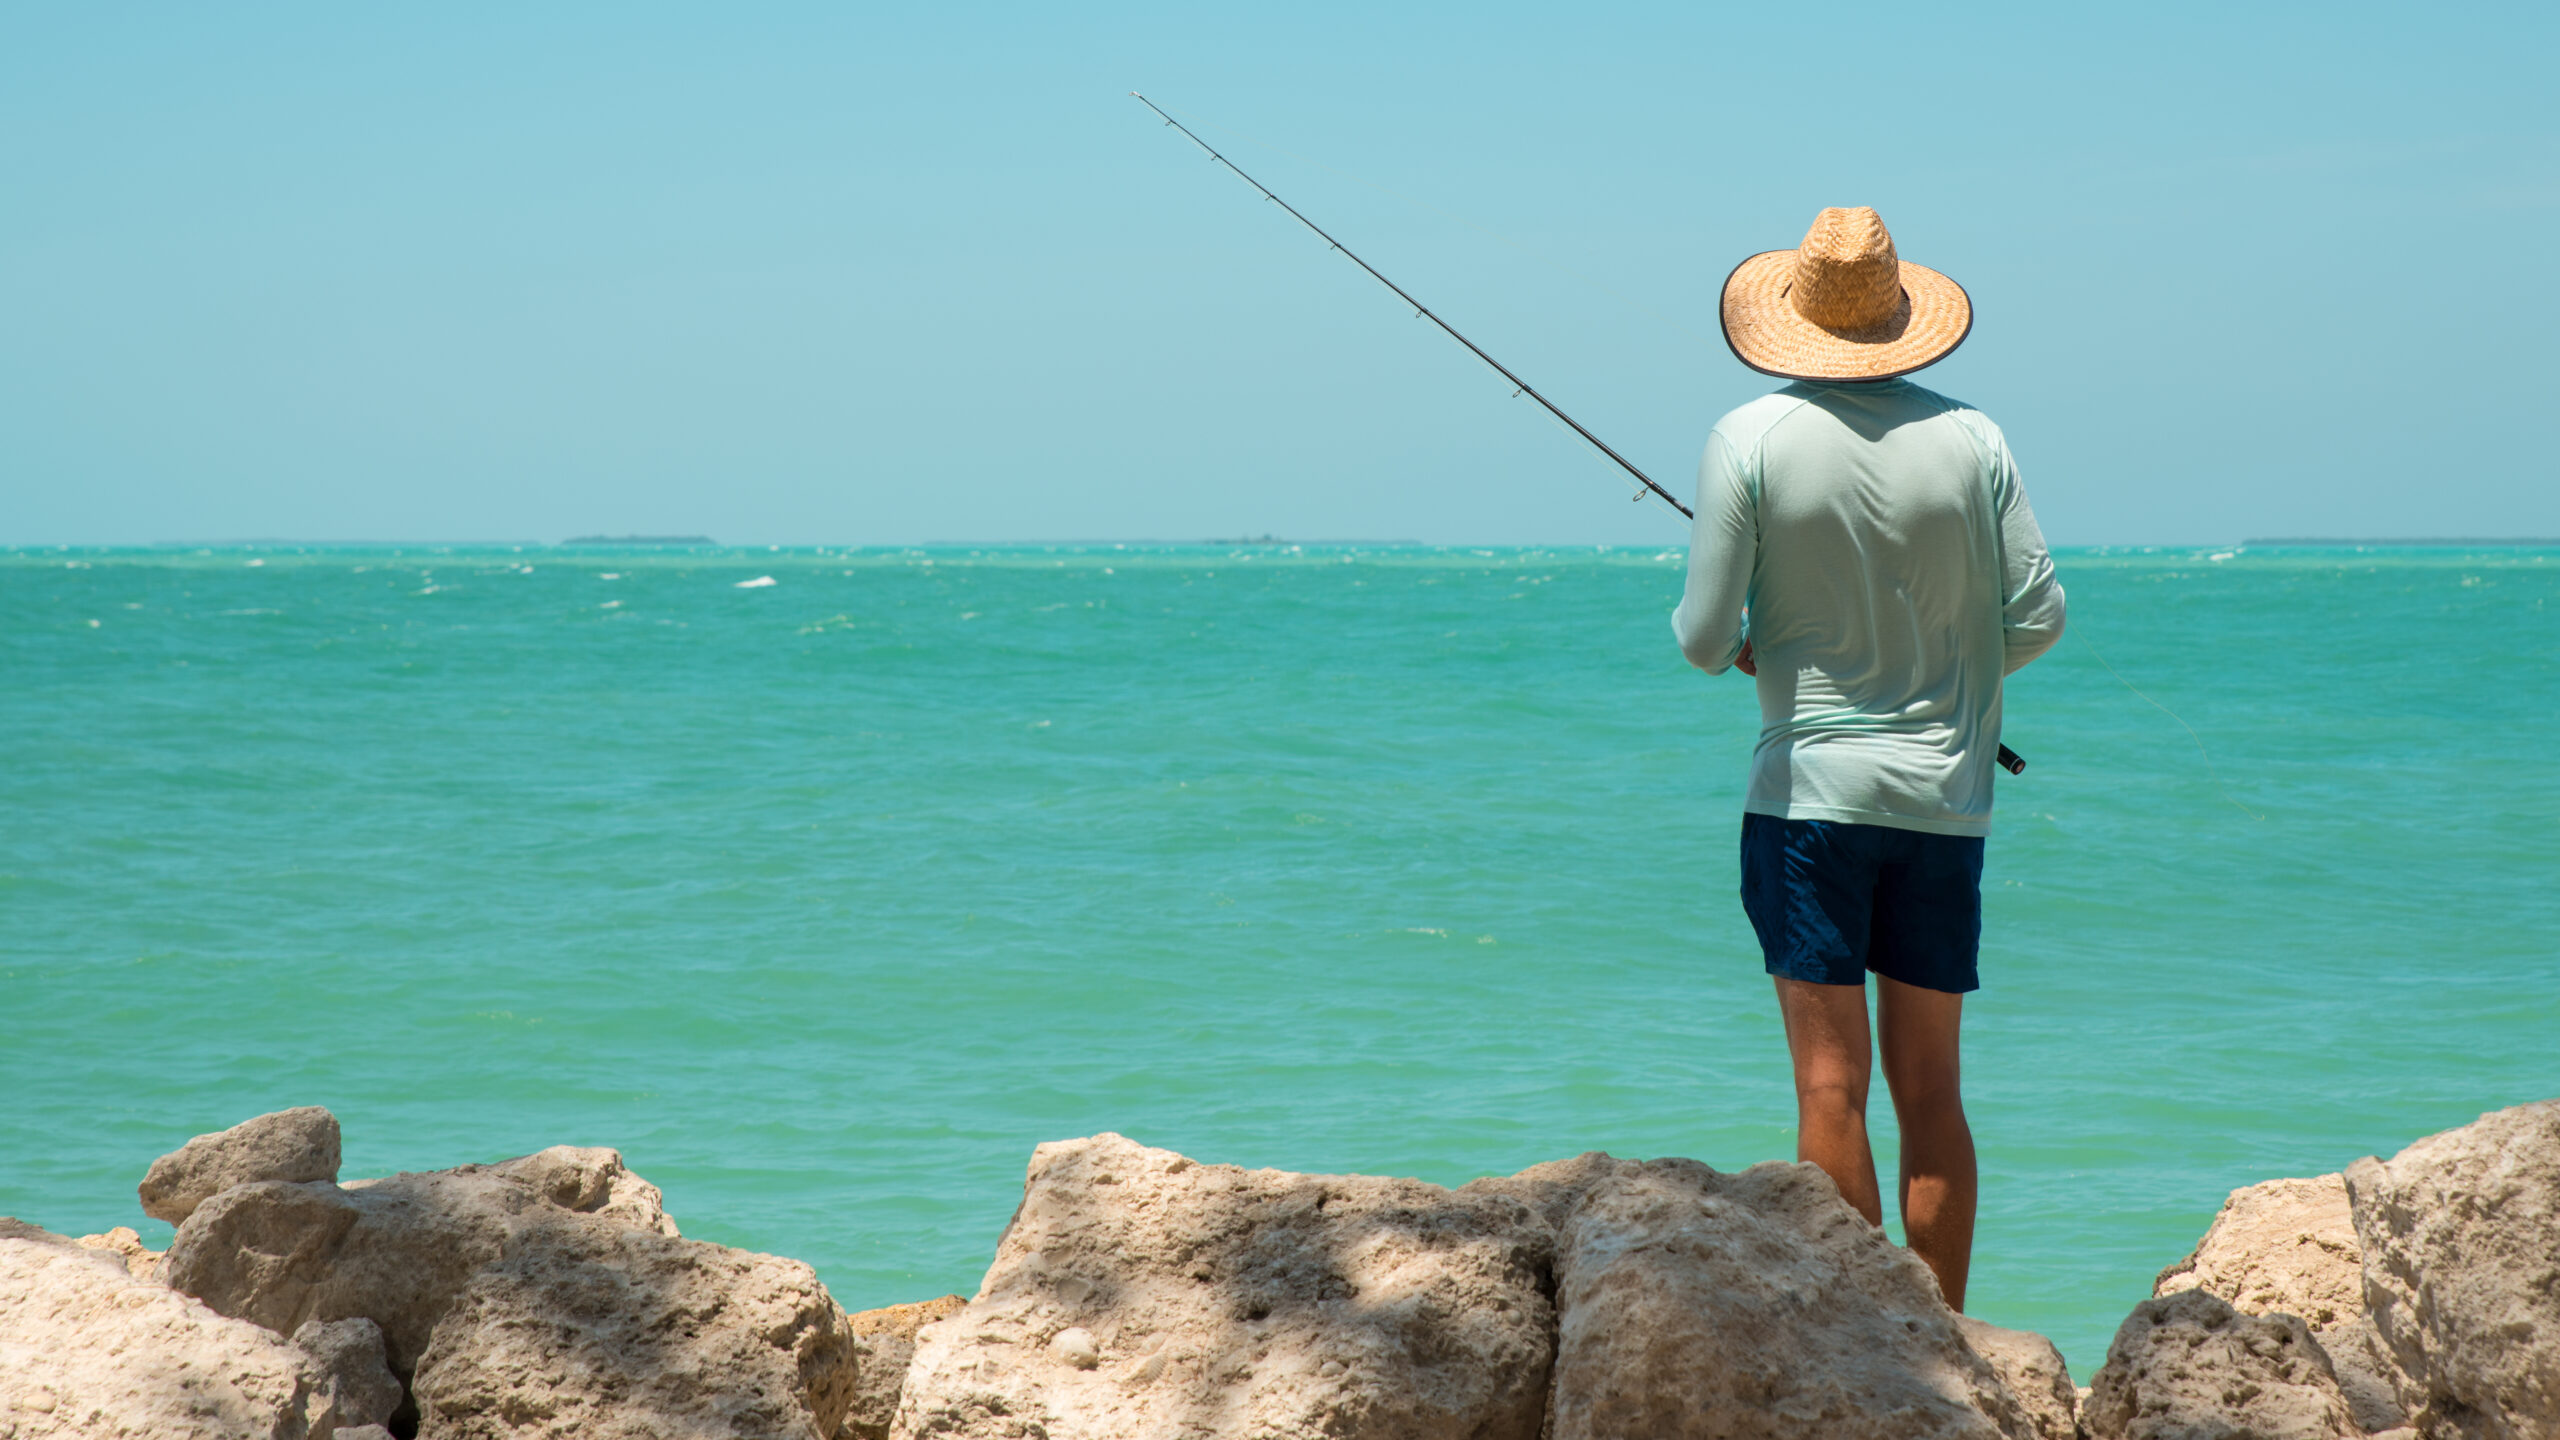 Fisherman with fishing rod. Atlantic ocean or Gulf of Mexico. Sp